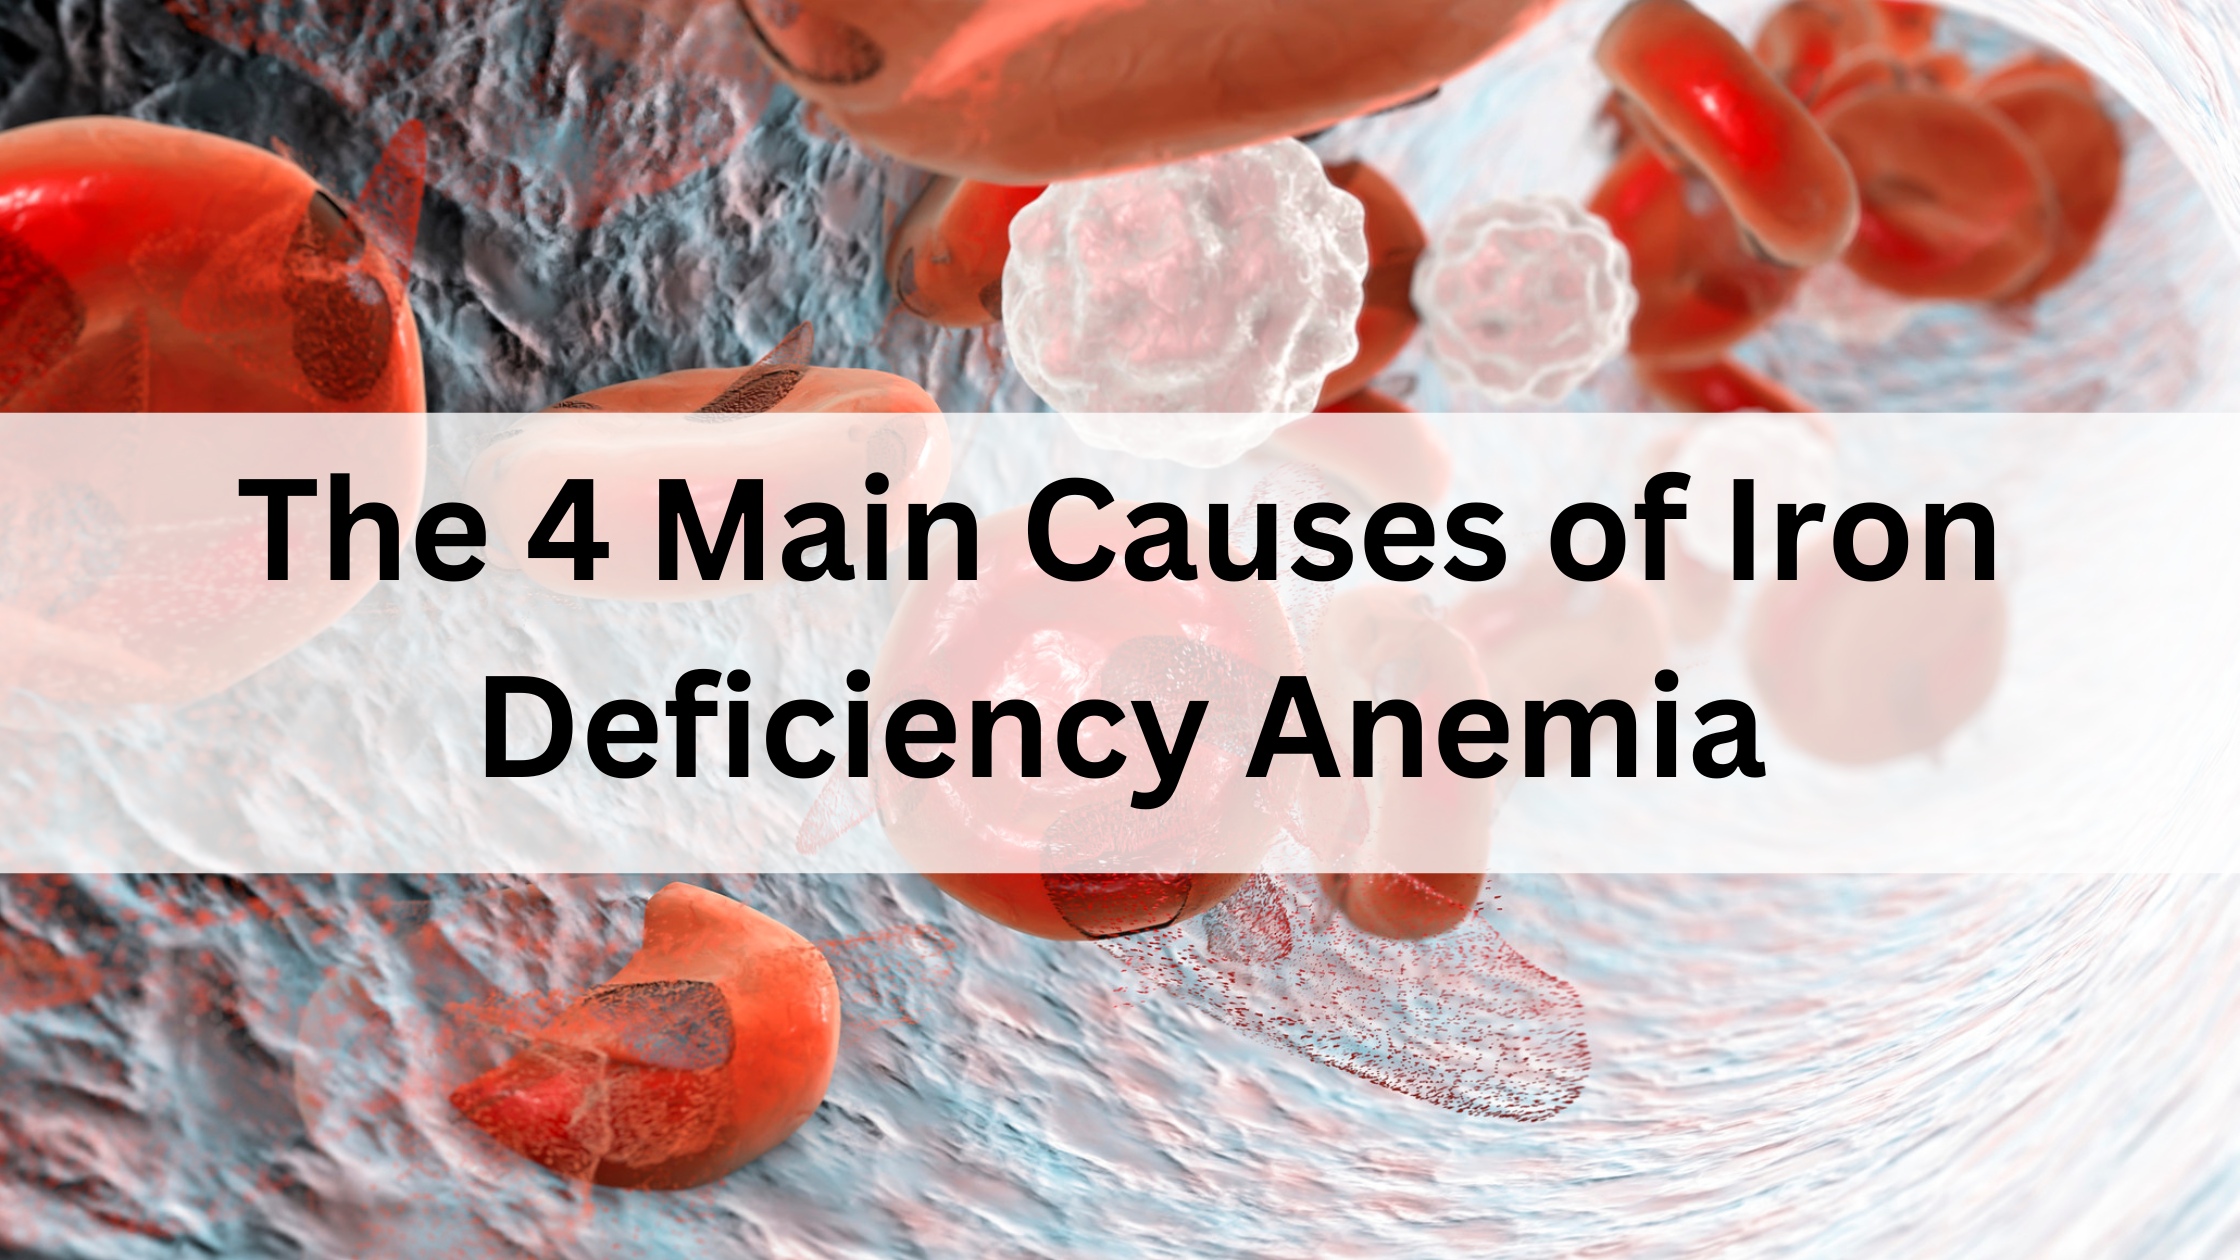 the-4-main-causes-of-iron-deficiency-anemia-iron